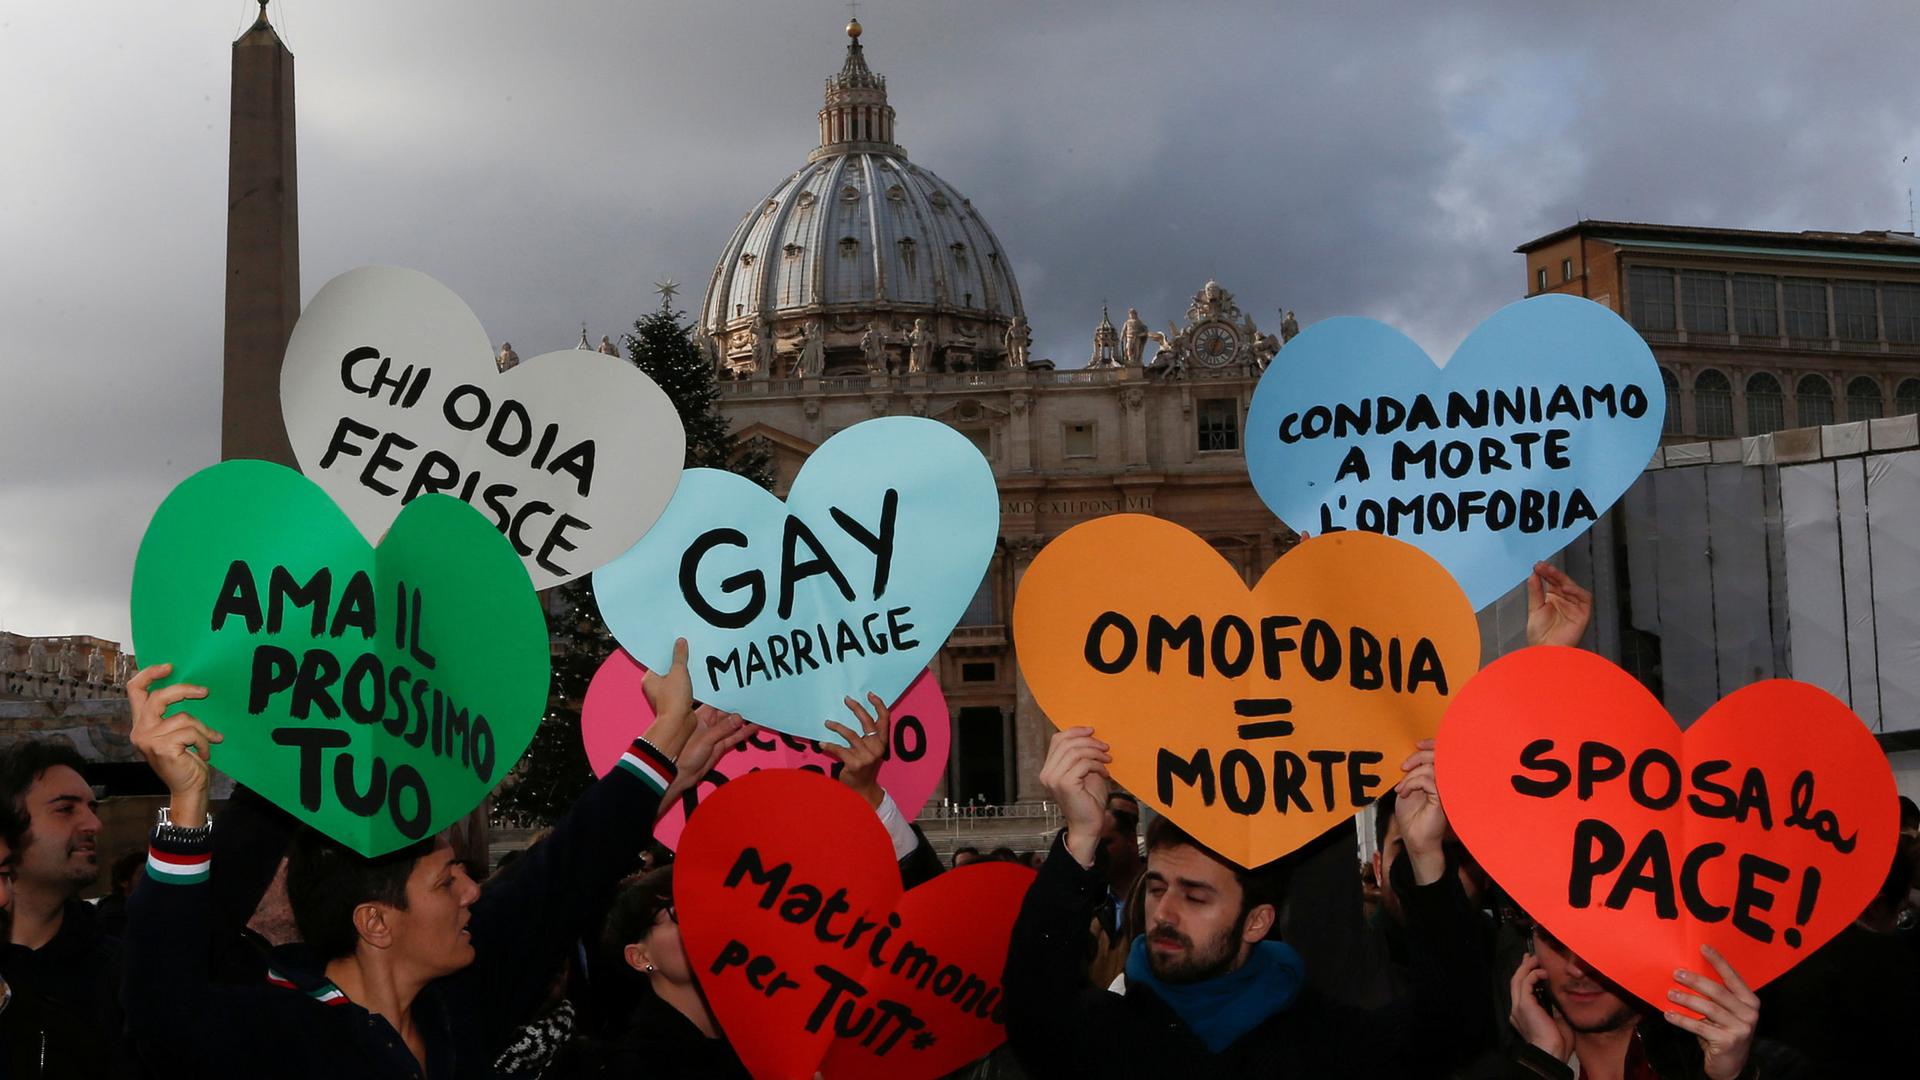 Several people are shown standing in St. Peter's square and holding heart-shaped signs.